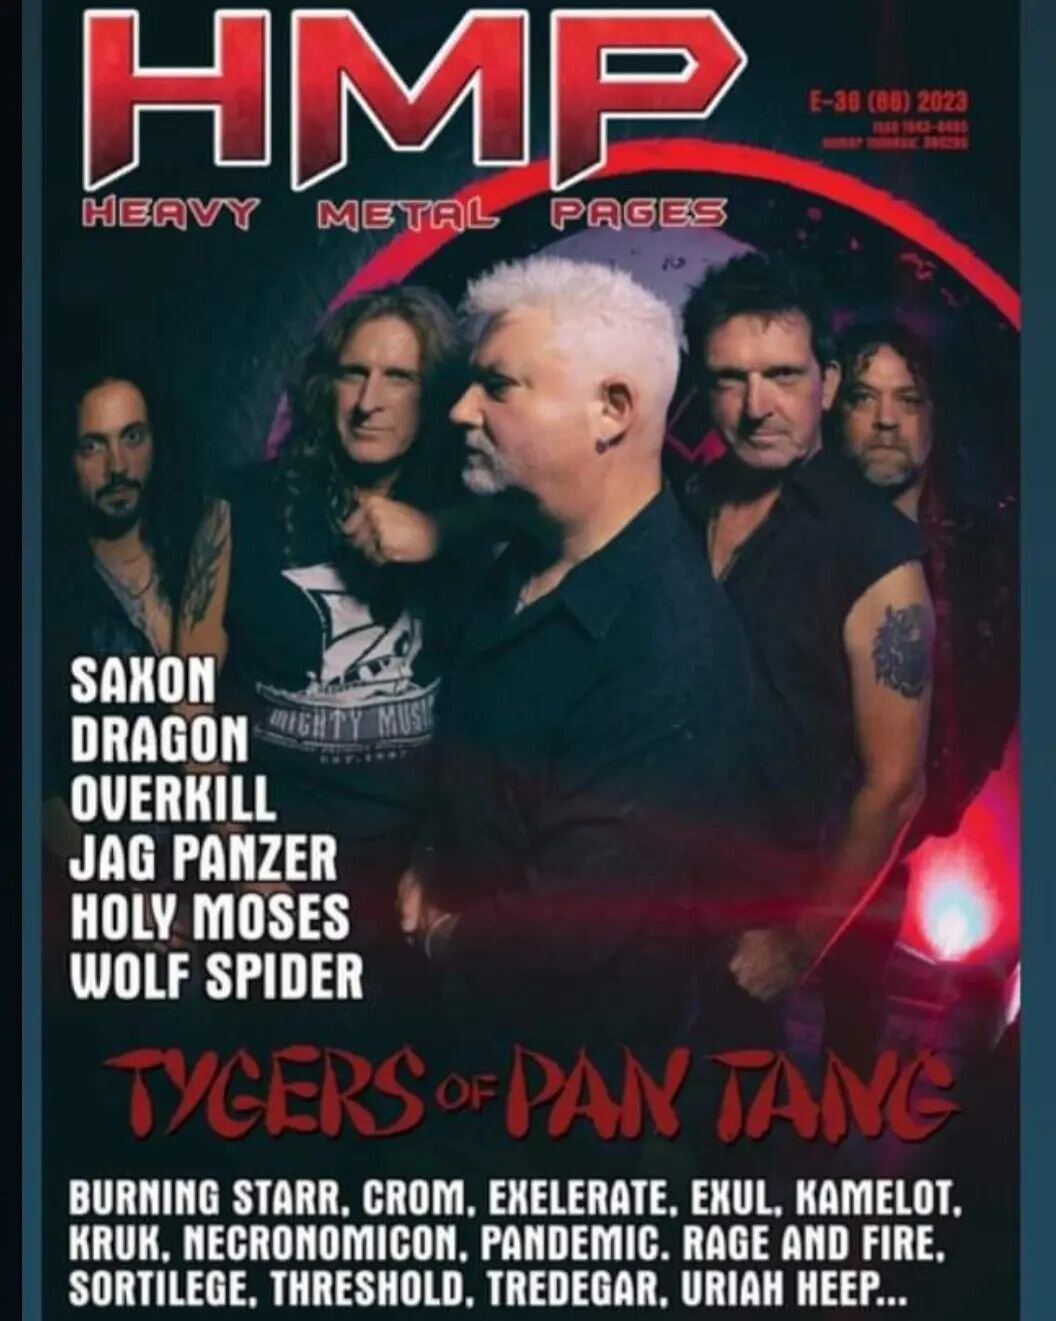 I &quot;think&quot; this is a first for me, a magazine cover!
Today sees the release of Bloodlines by Tygers of Pan Tang for whom I supplied the album photo of the band. It's great to see it used on the record and even better to see it on the cover o